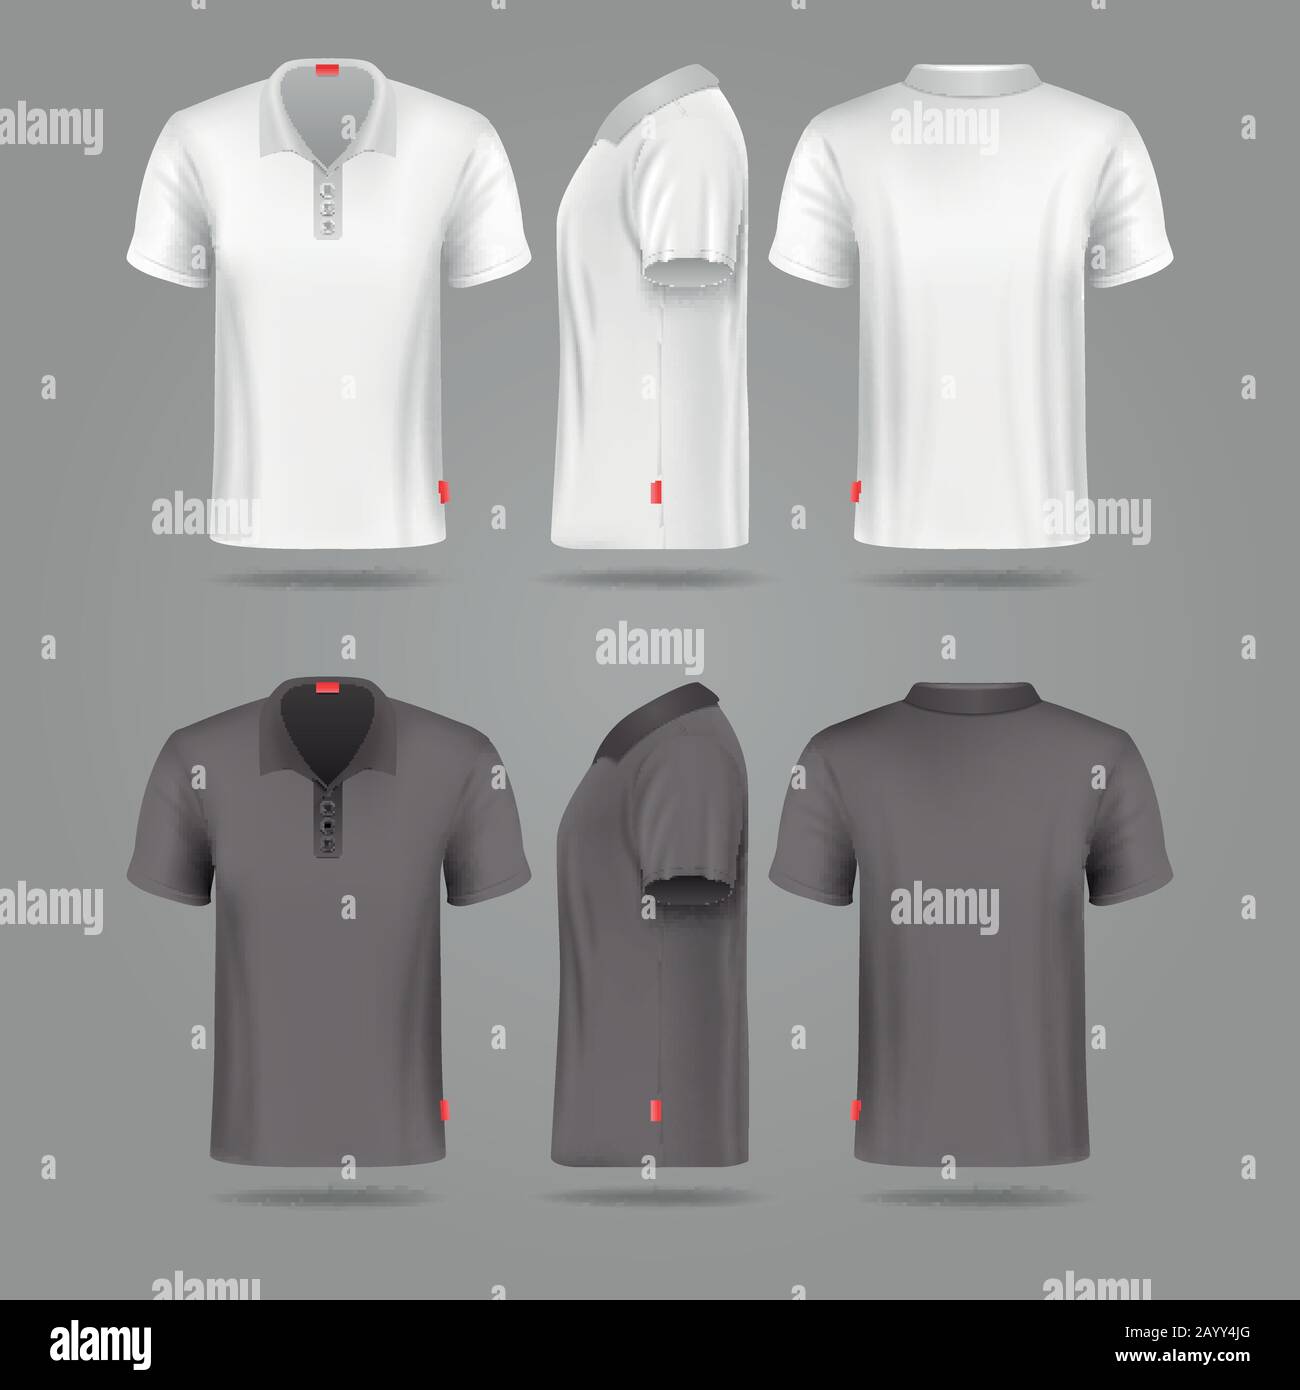 Download White Black Mens Polo T Shirt Front Back And Side Views Vector Mockups Template Fashion Tshirt For Sport Illustration Stock Vector Image Art Alamy